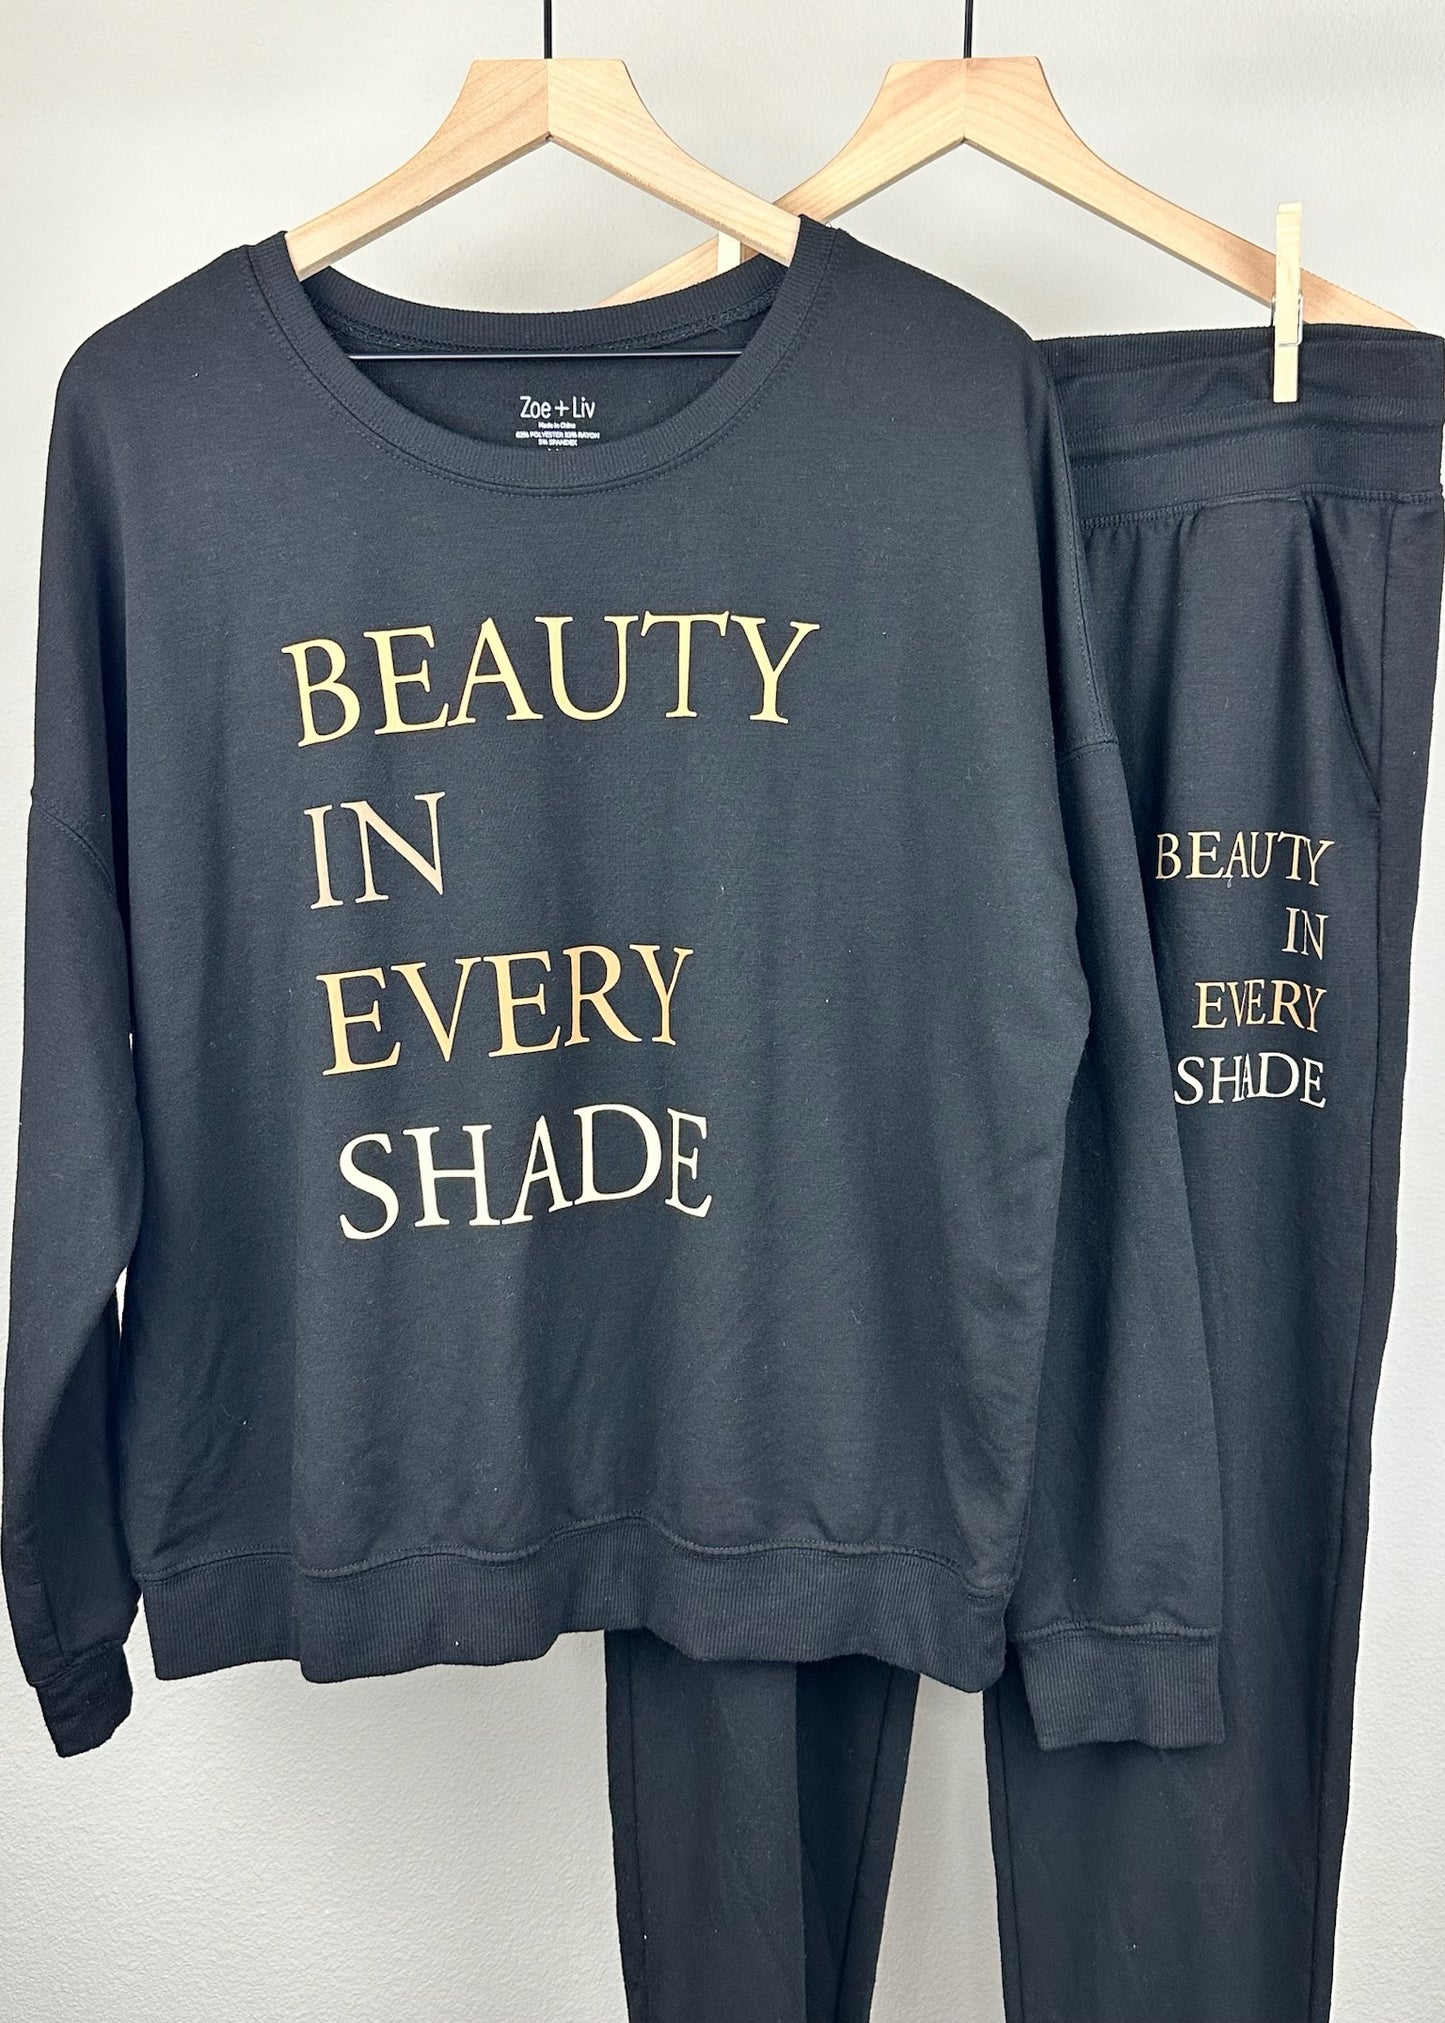 Every Shade Black Sweatshirt (only) by Zoe + Liv